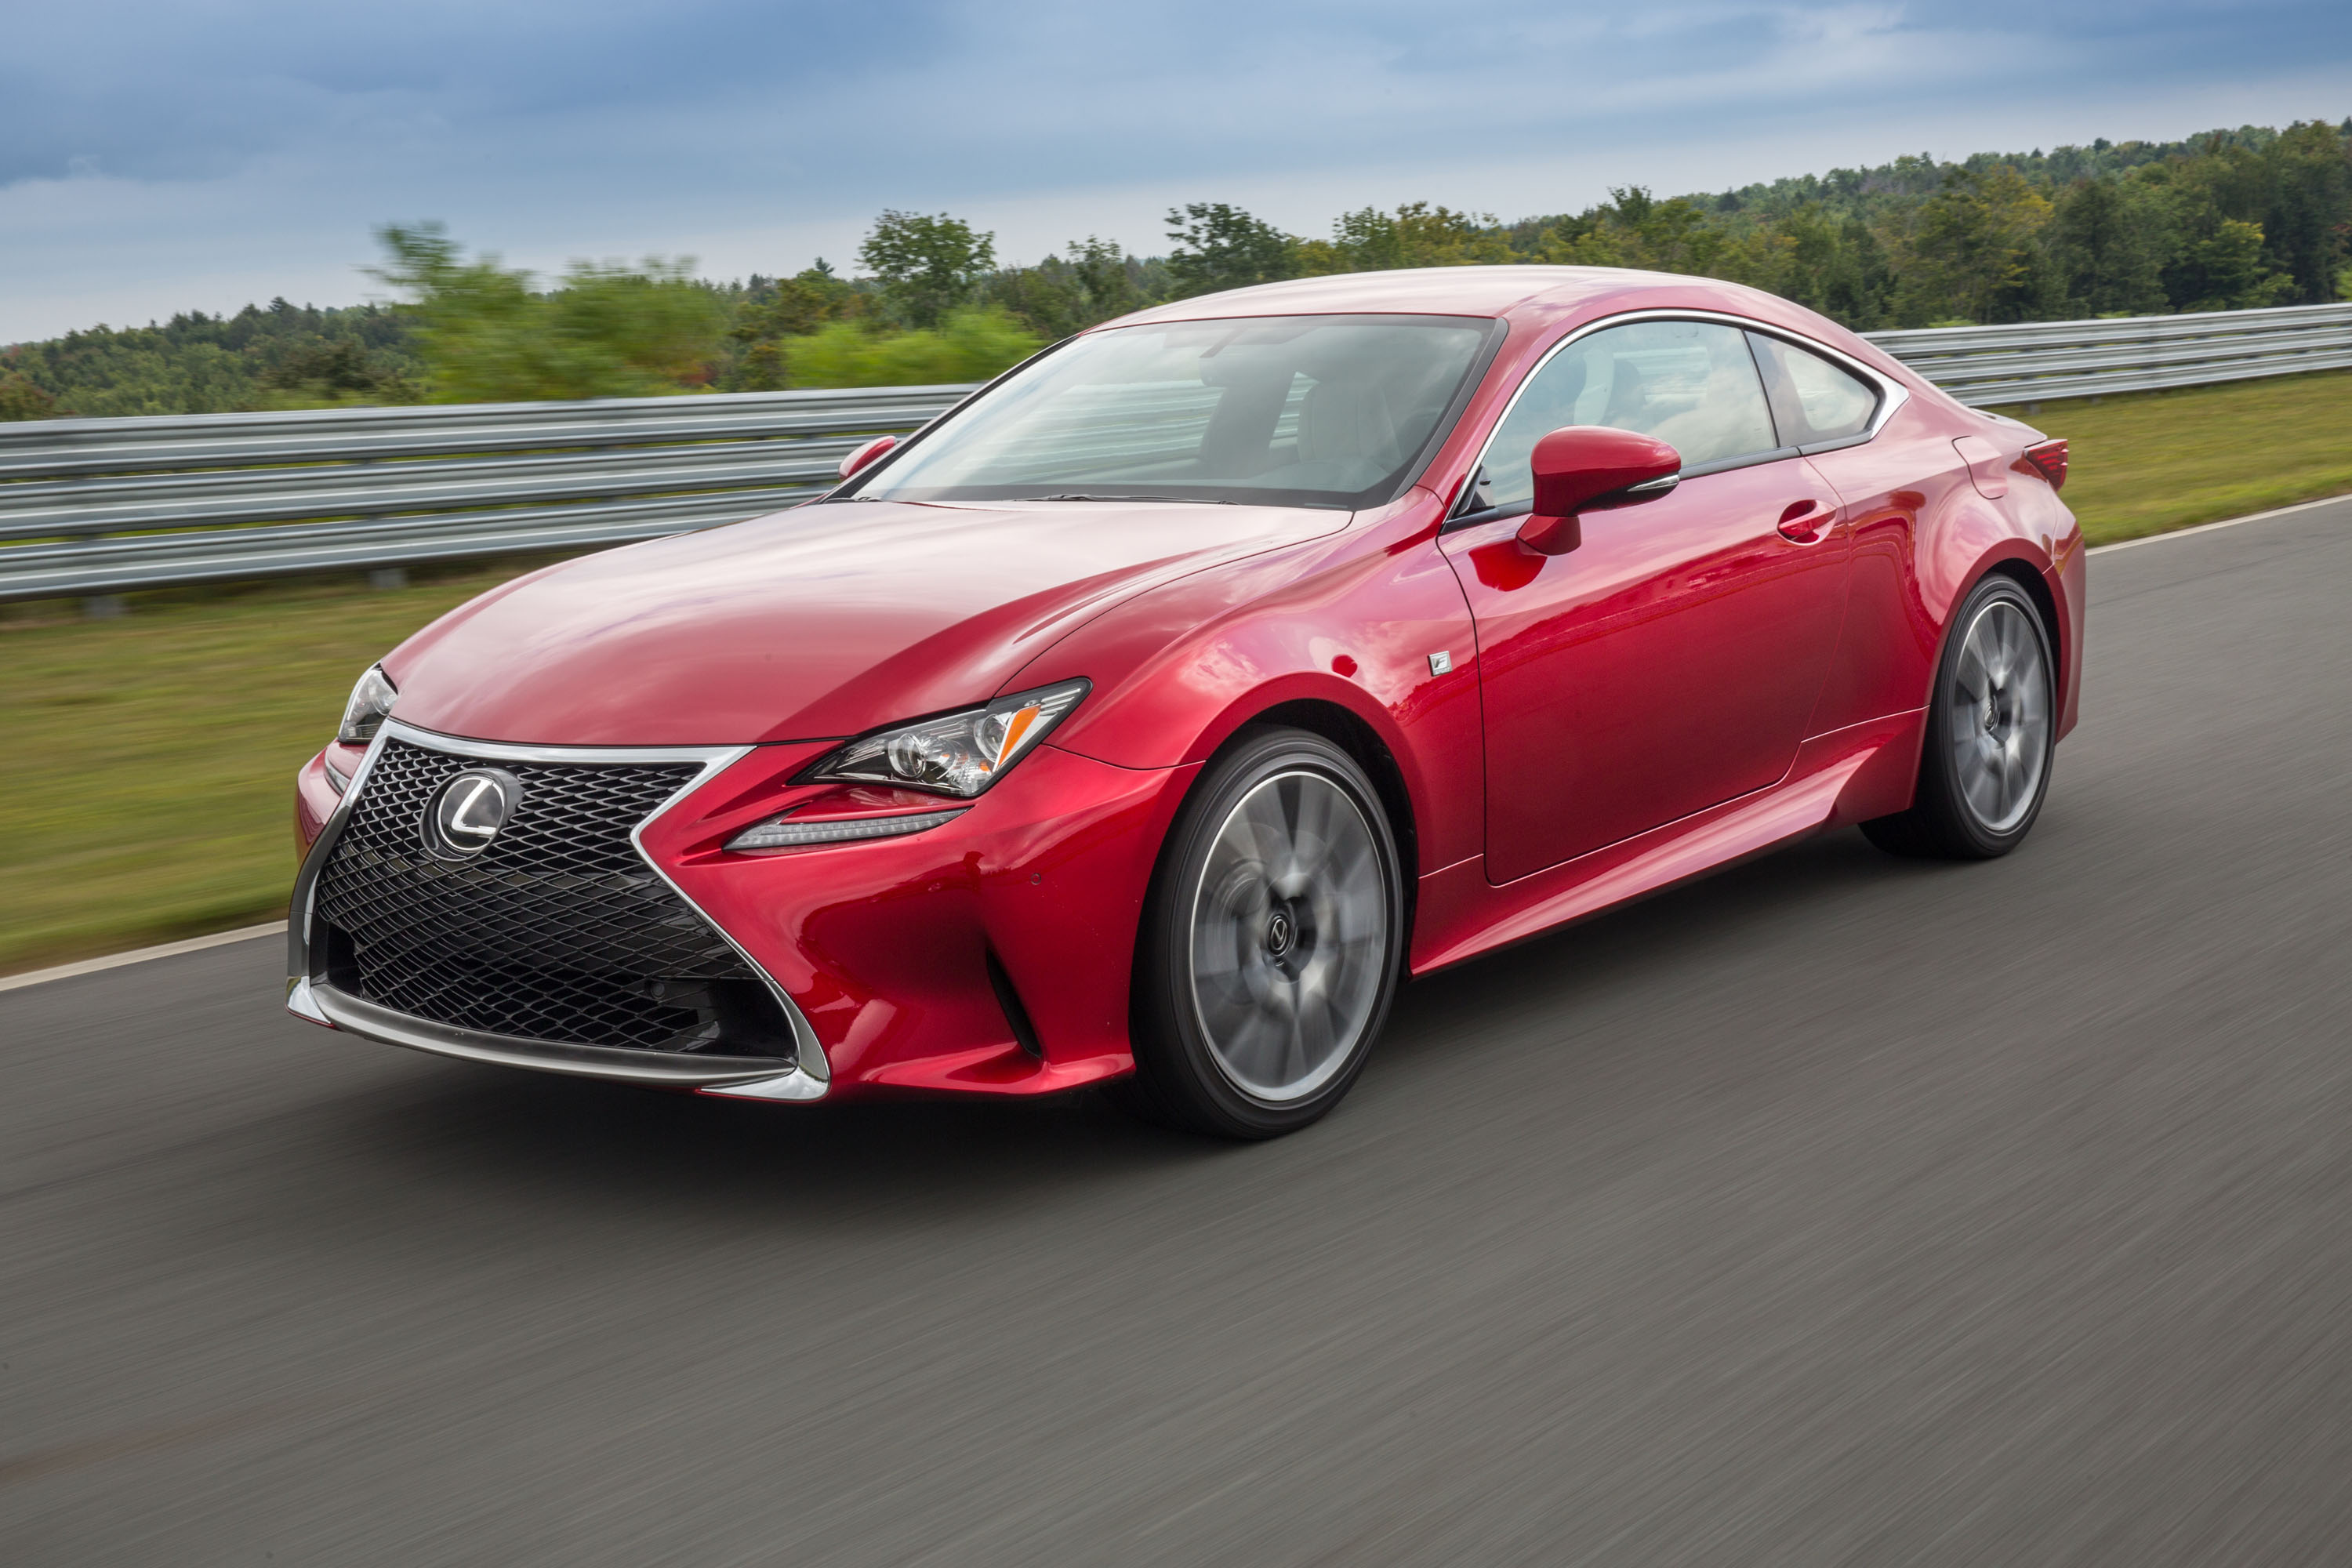 2017 Lexus Rc 350 Awd Not Quite A Sports Or Luxury Car But Just